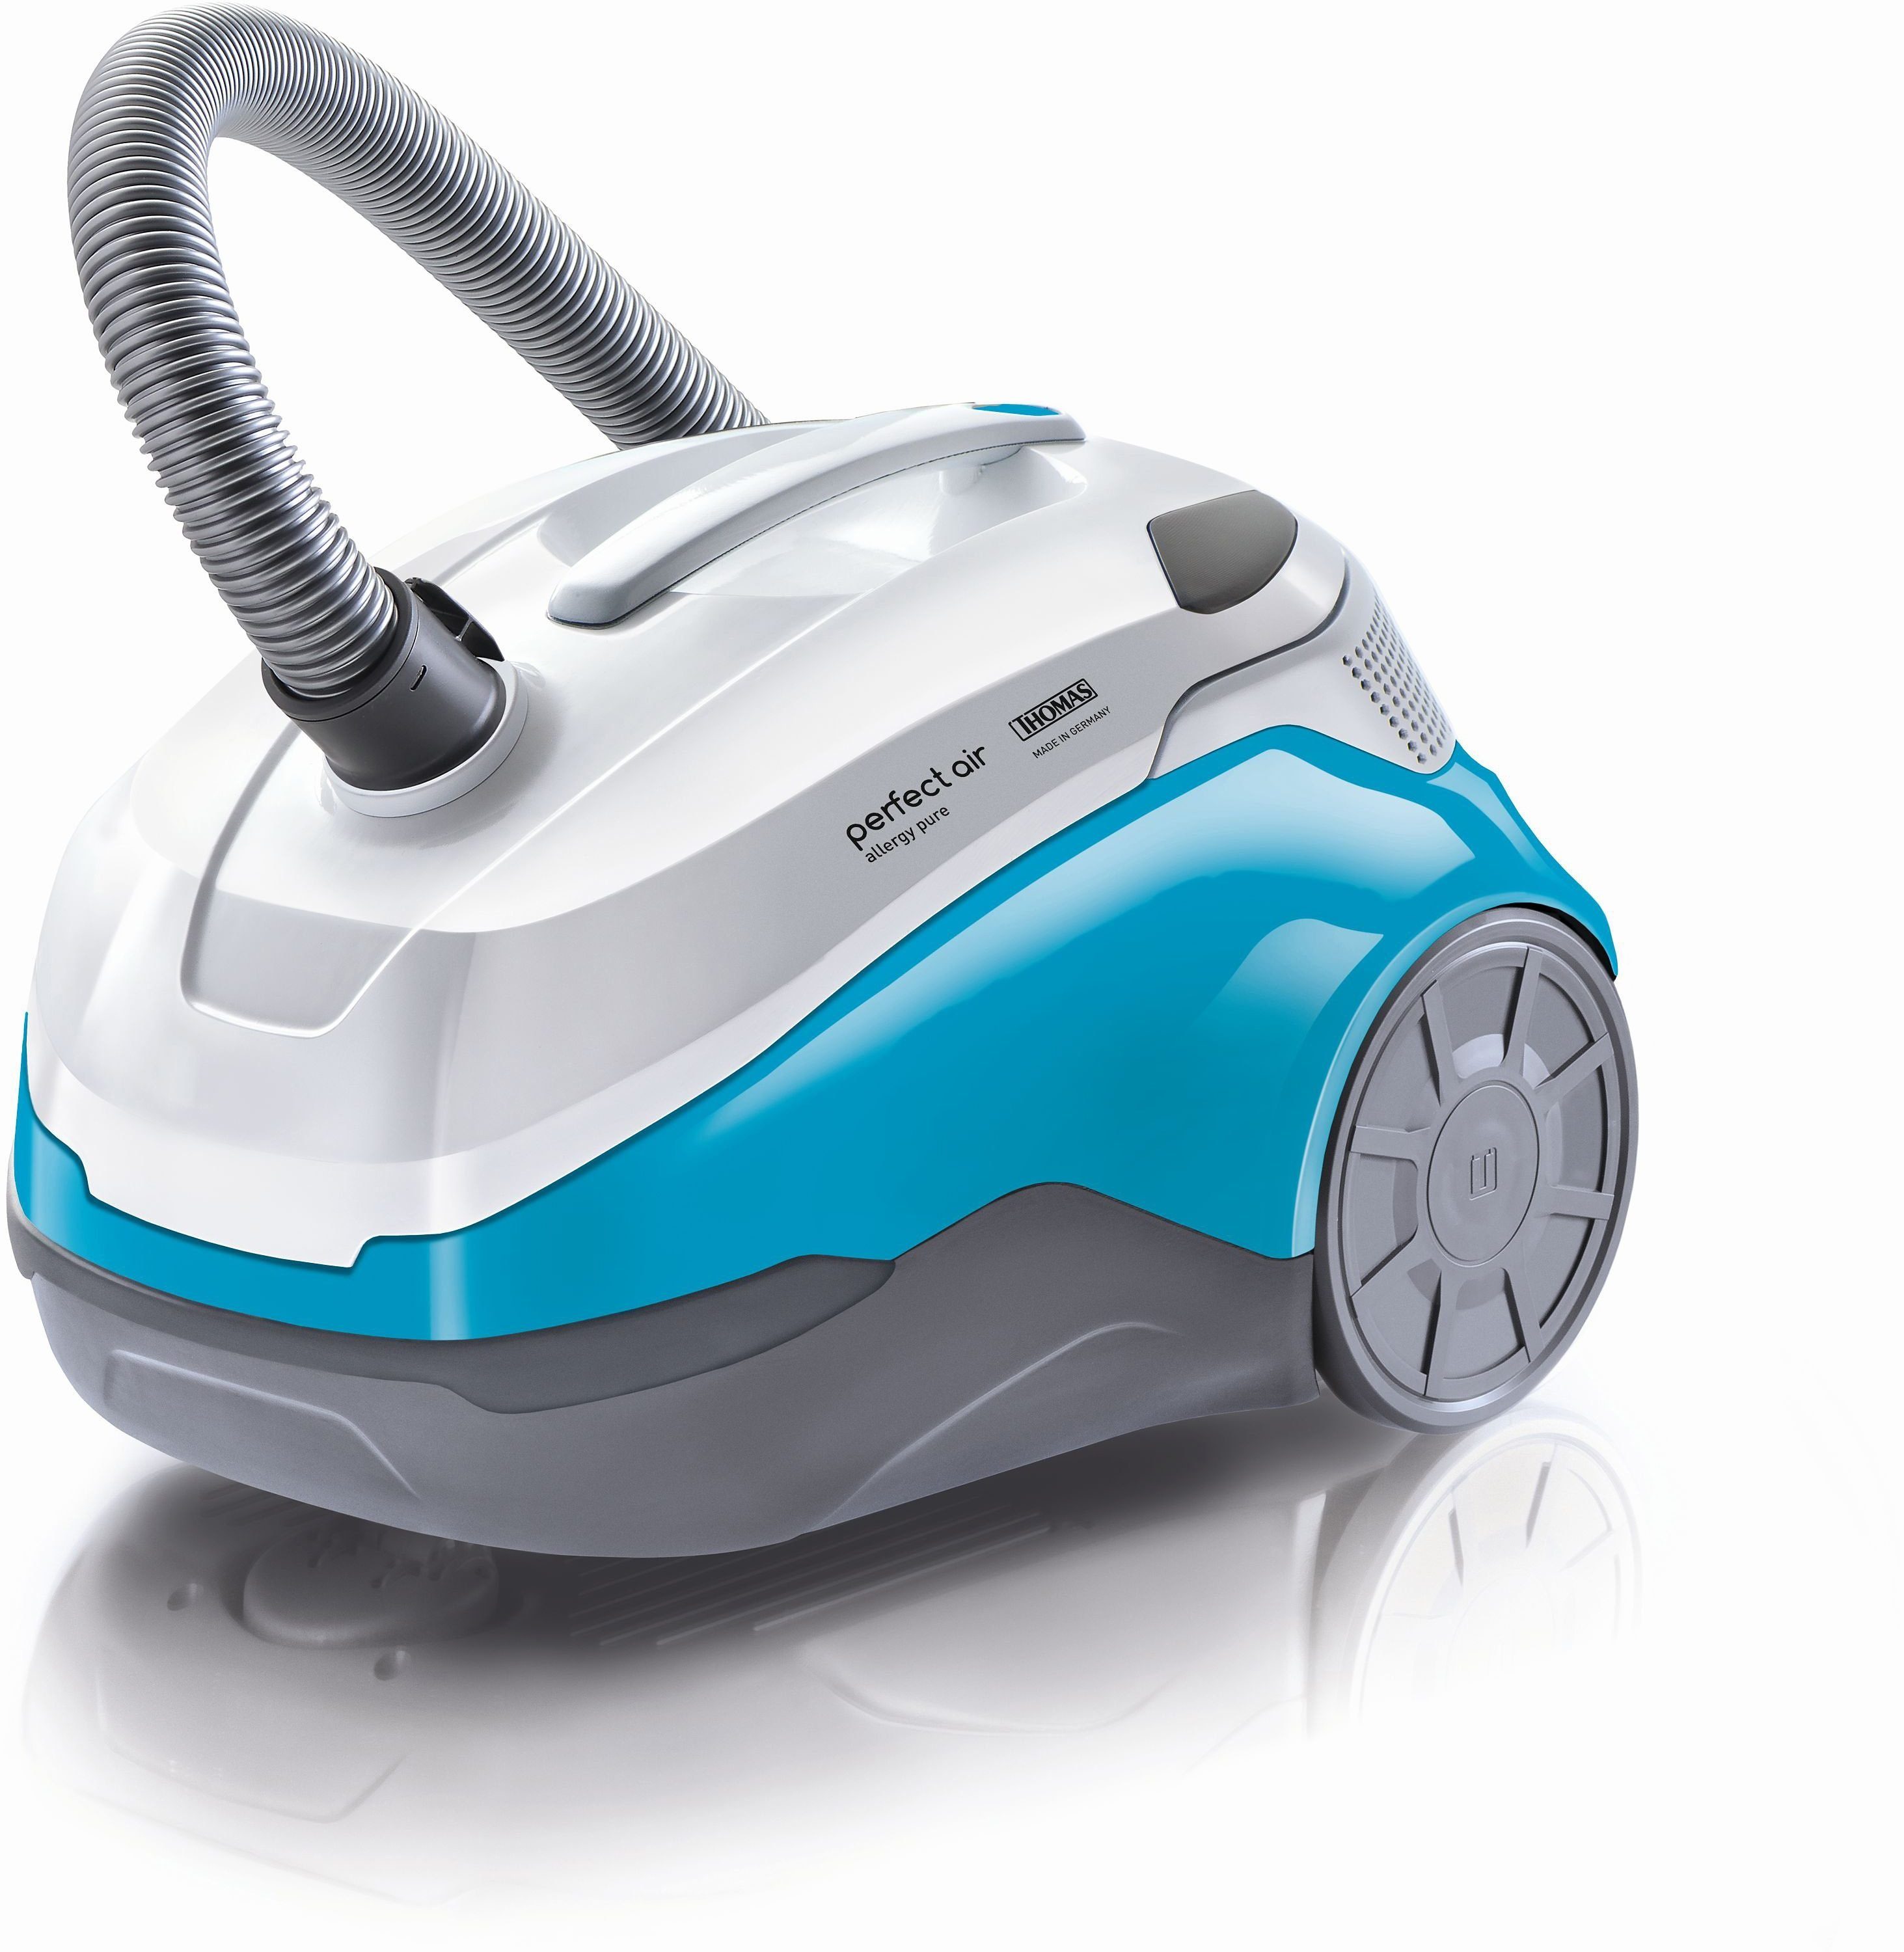 Thomas Wasserfiltersauger perfect air allergy pure, 1700 W, beutellos